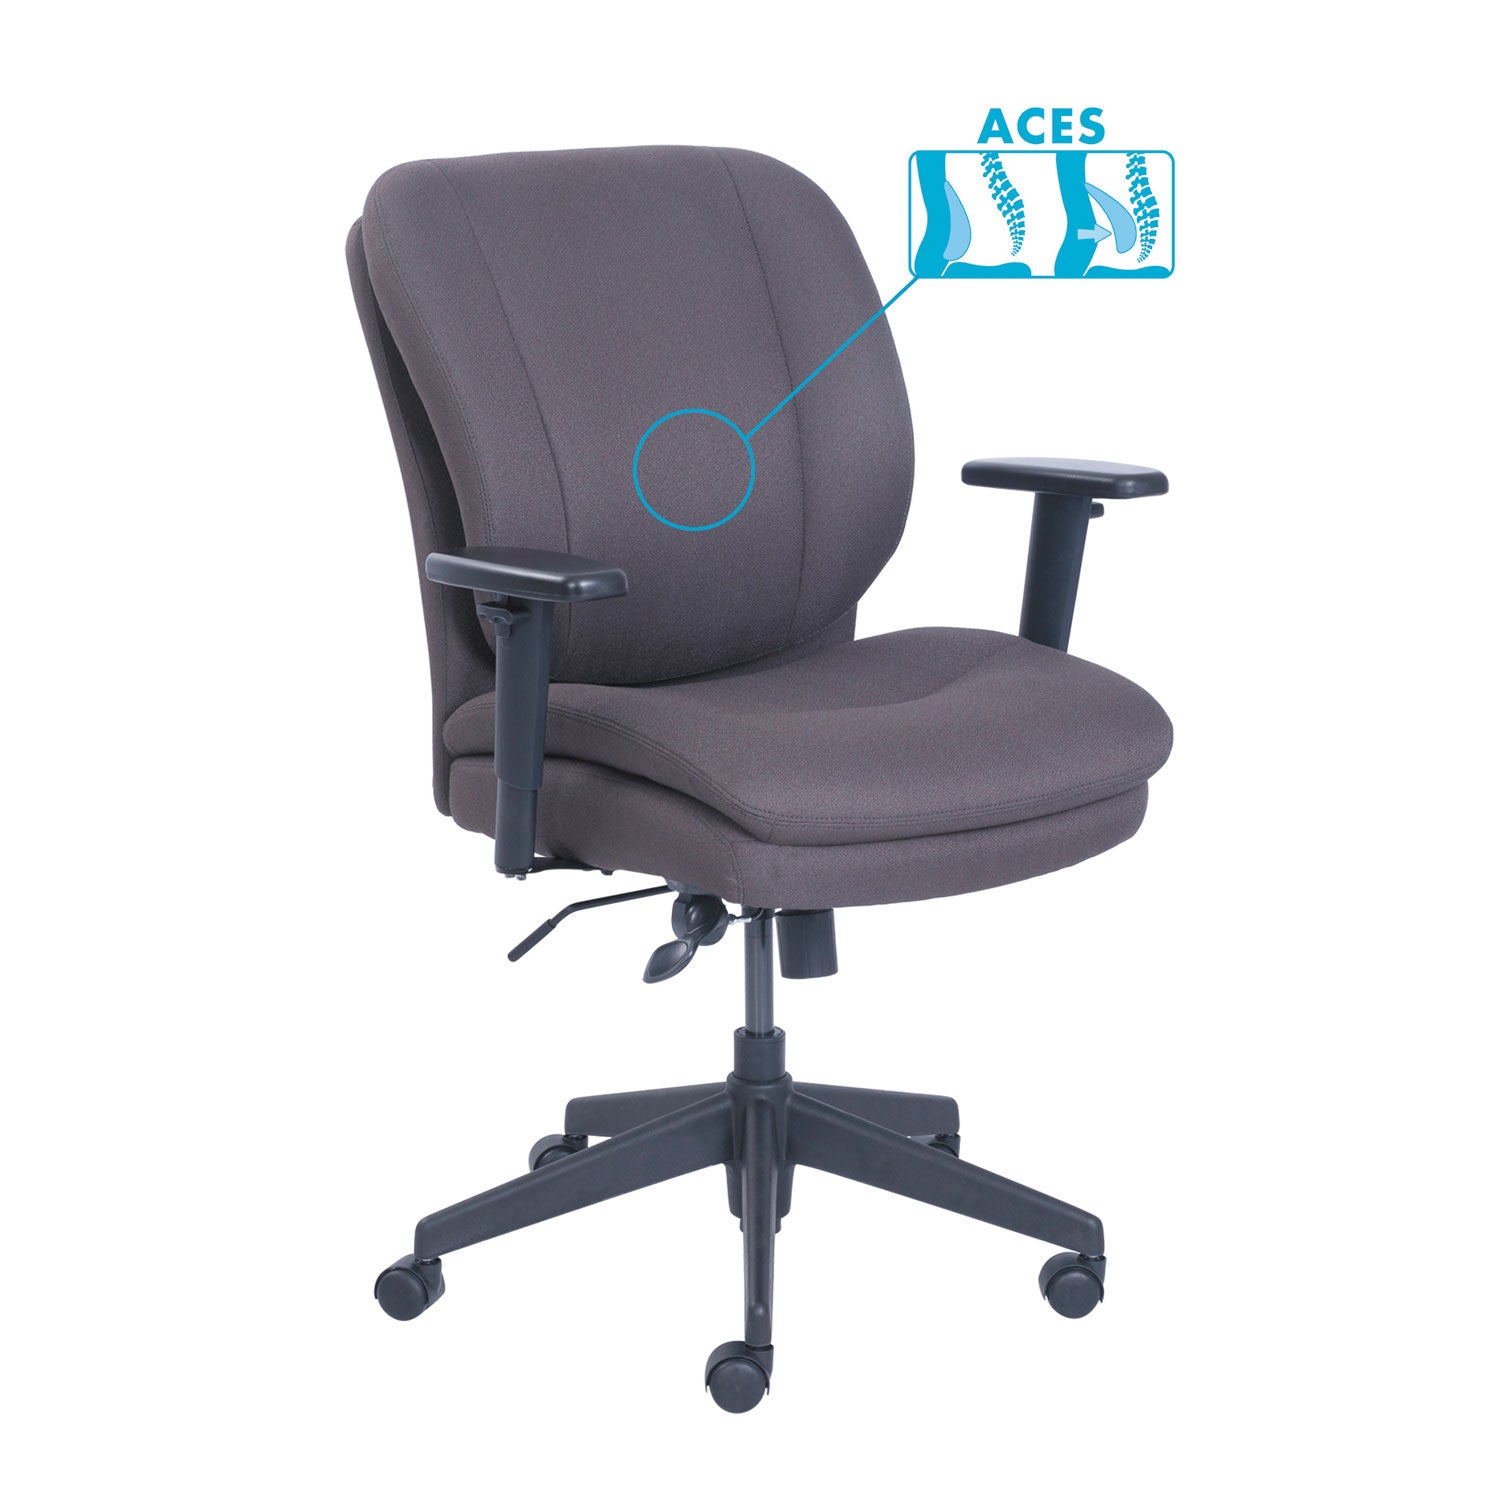 cosset-ergonomic-task-chair-supports-up-to-275-lb-195-to-225-seat-height-gray-seat-back-black-base_srj48967b - 1